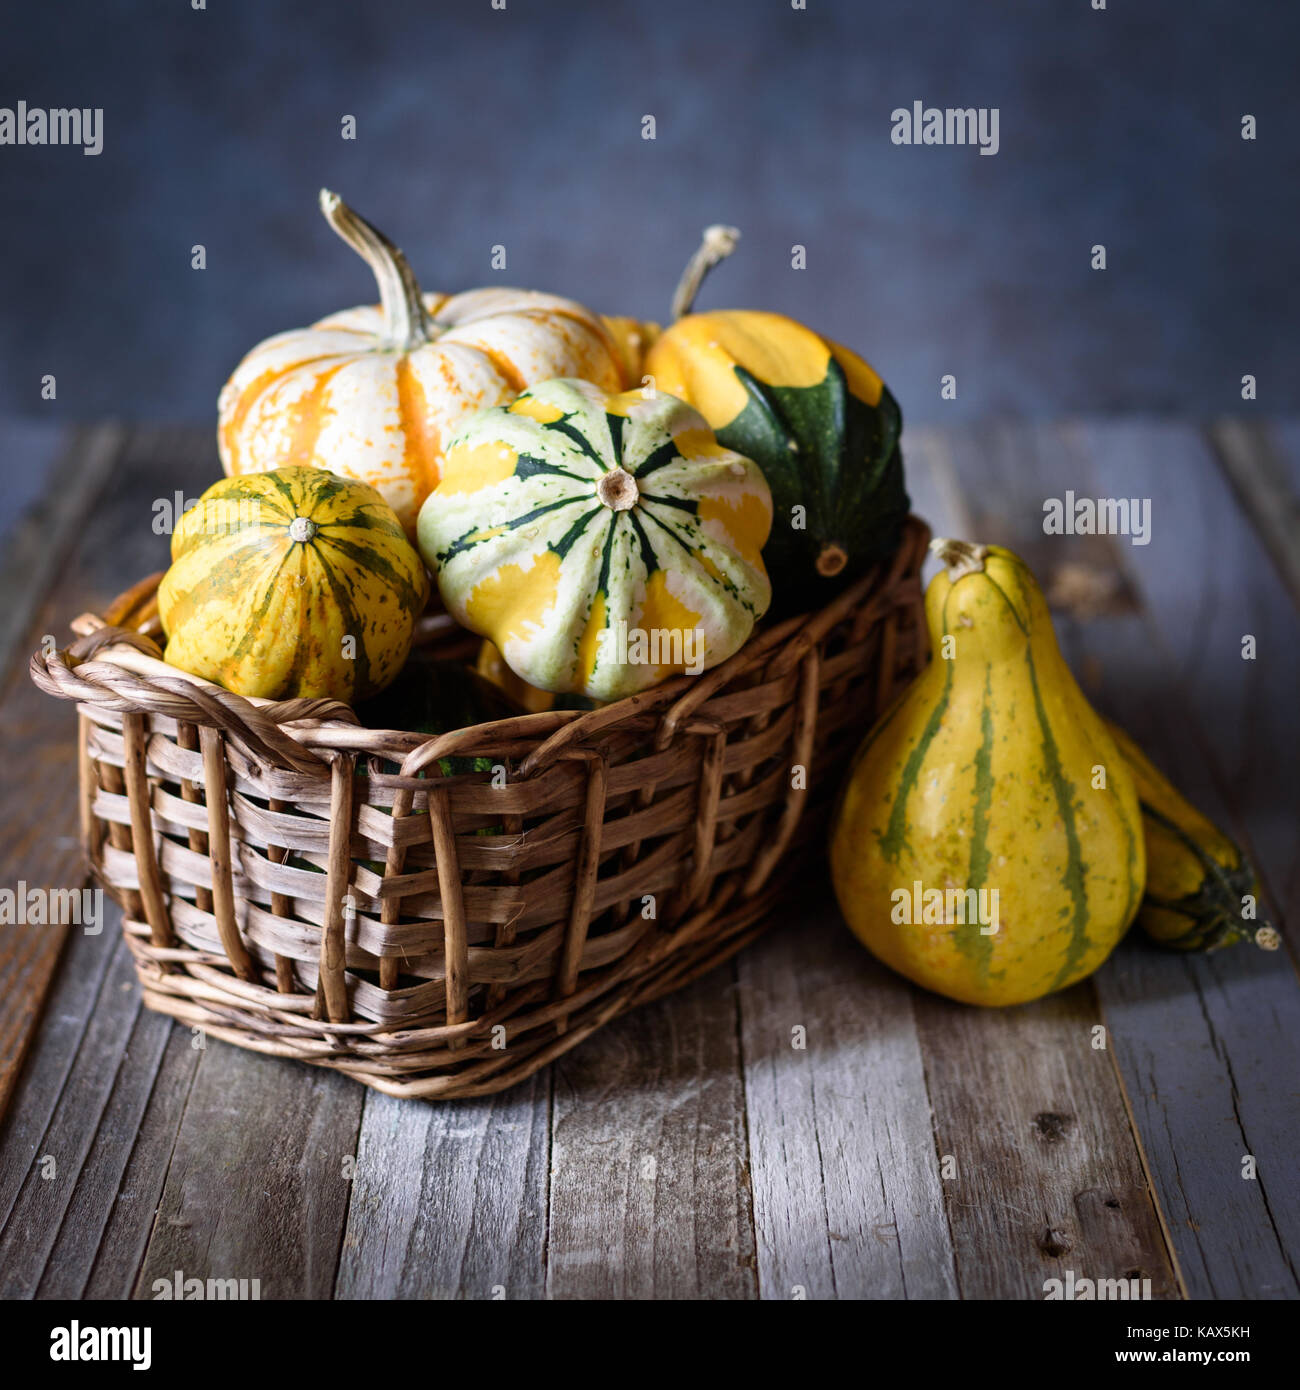 Fall decorative gourds and pumpkins in a basket on natural rustic wooden background Stock Photo